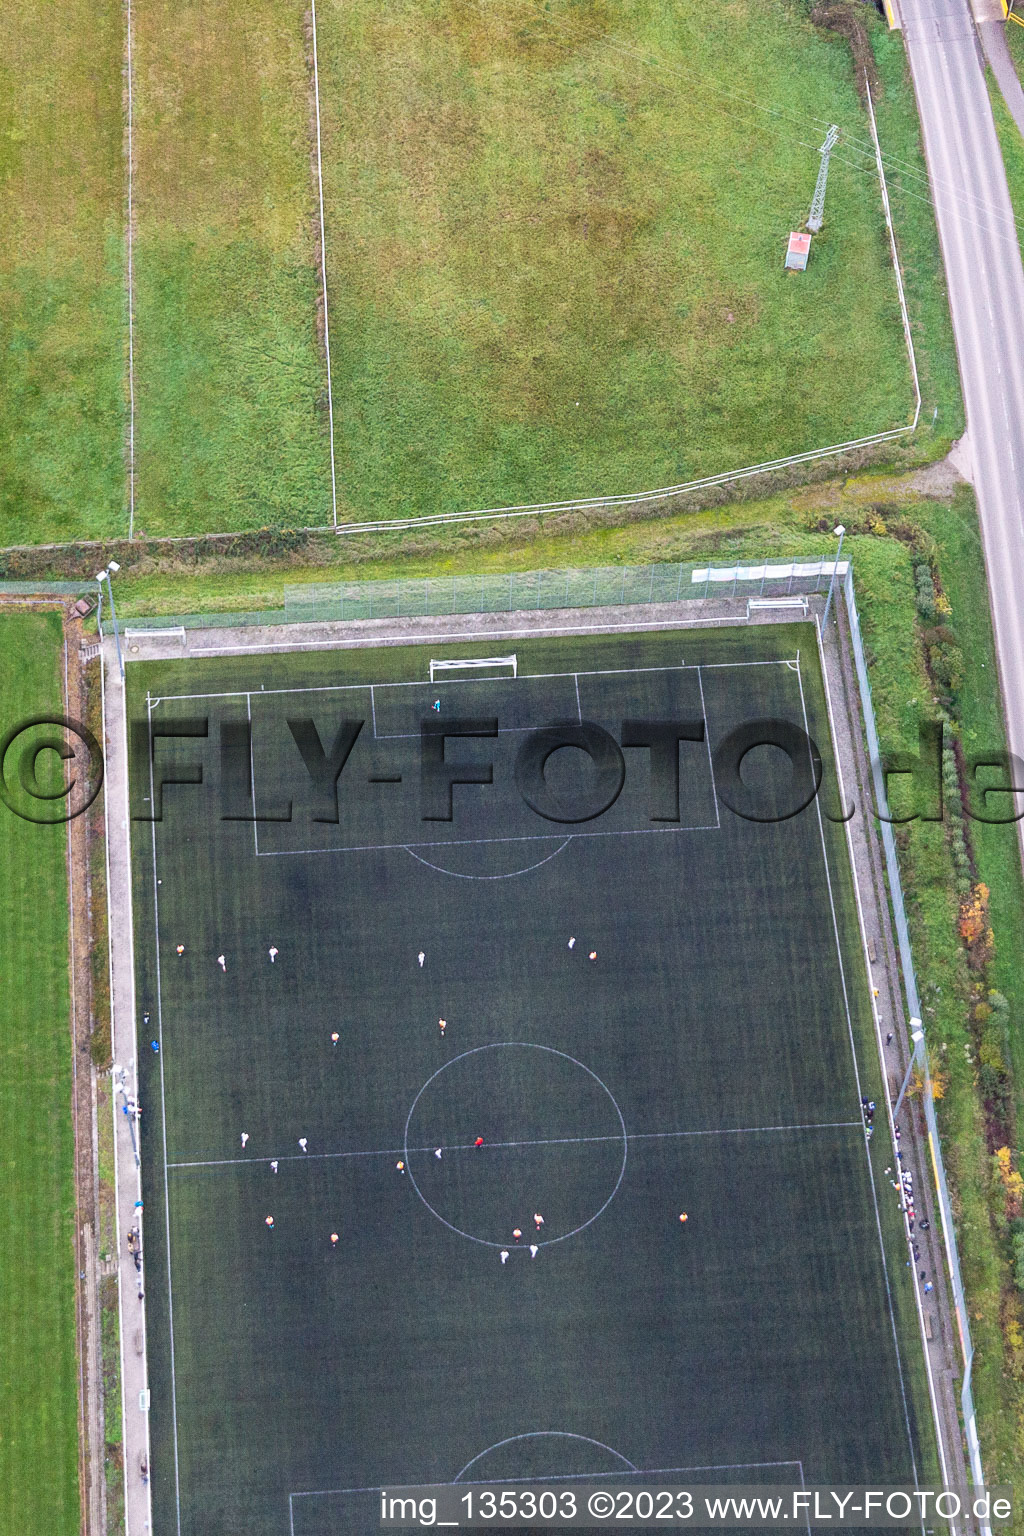 Oblique view of Artificial turf pitch in the district Minderslachen in Kandel in the state Rhineland-Palatinate, Germany